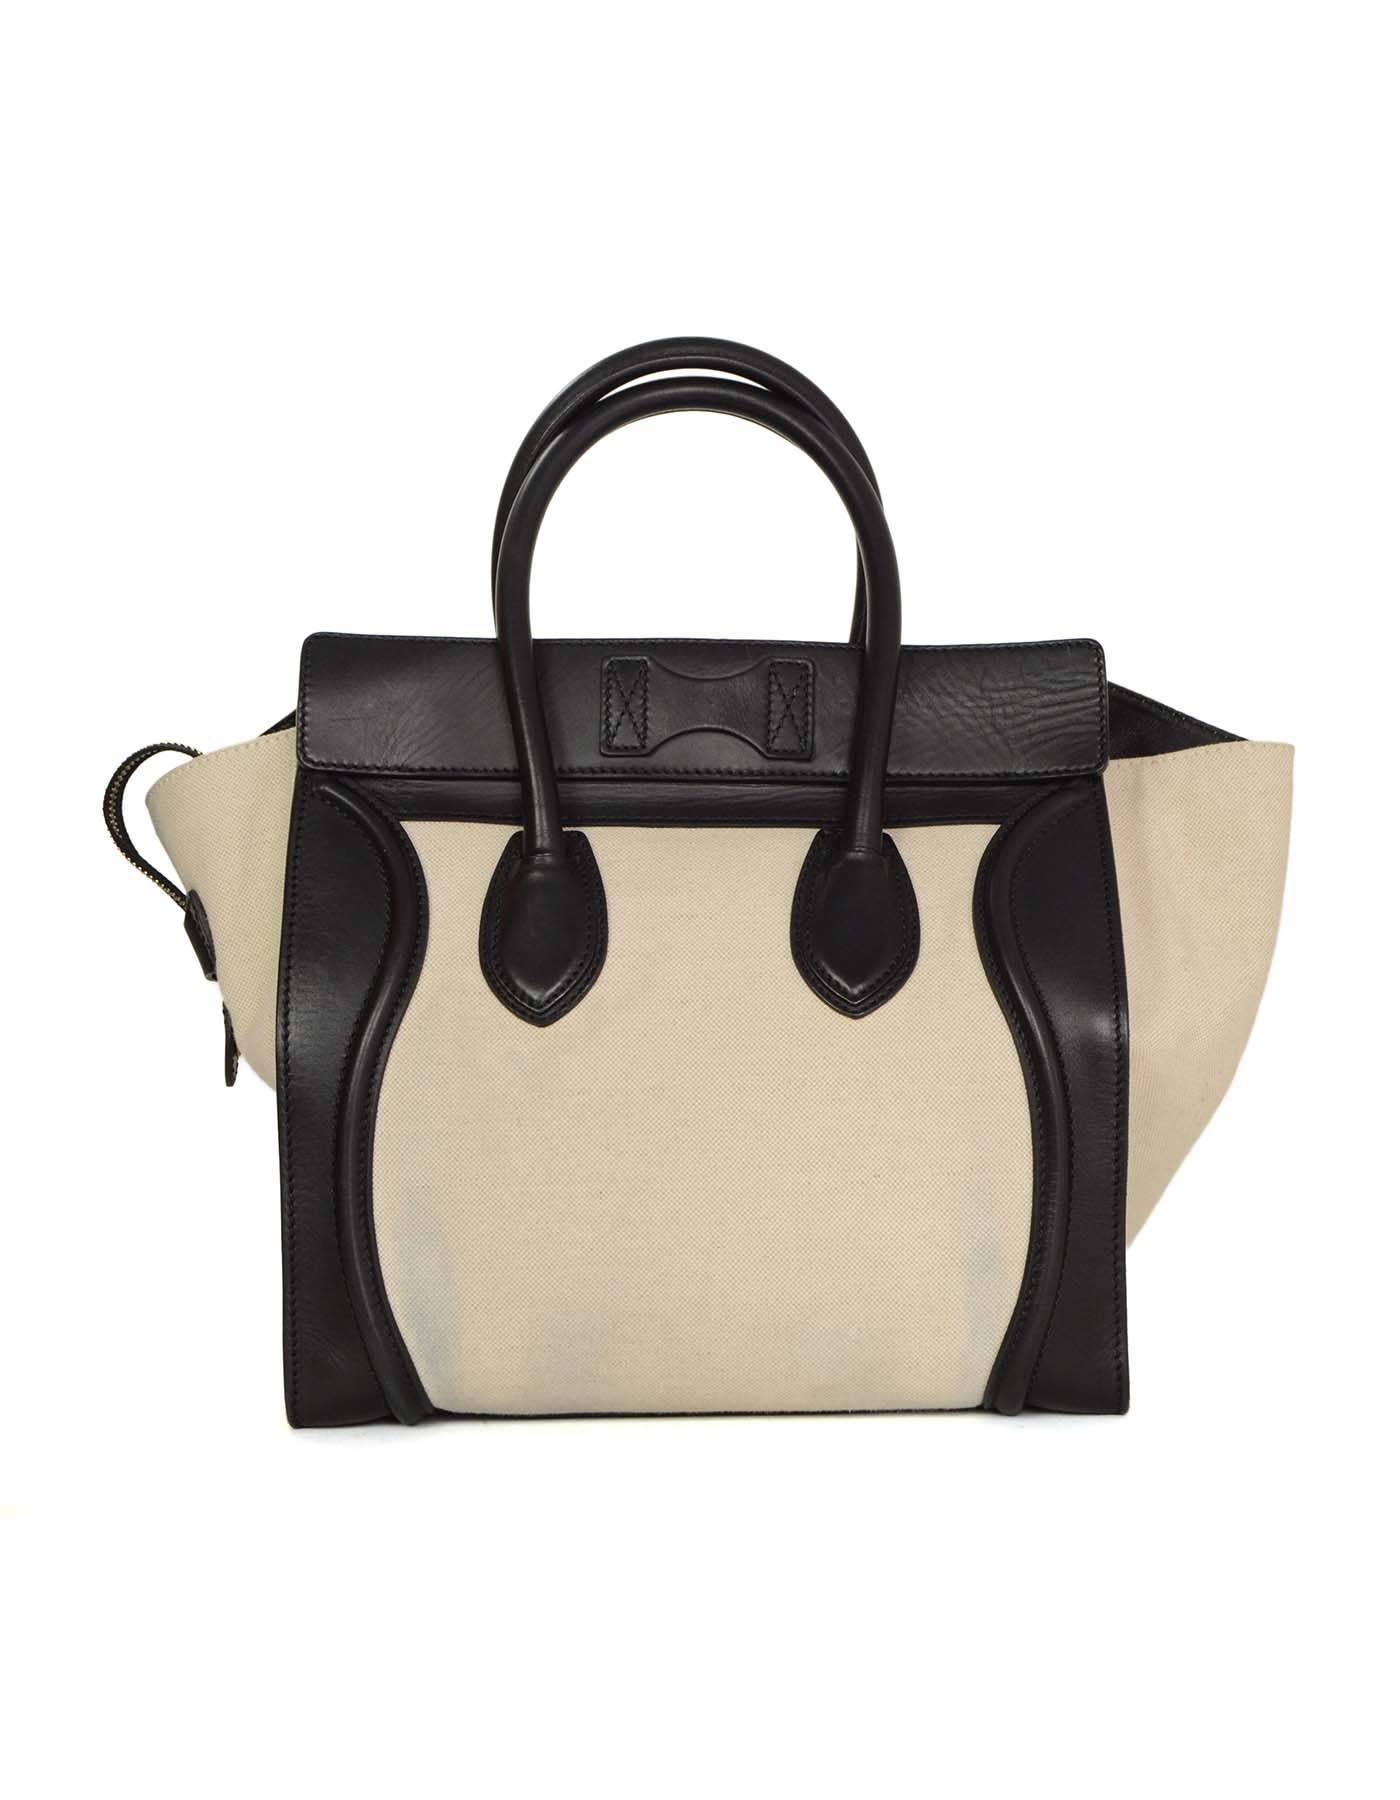 Celine Ivory & Black Mini Luggage Tote 
Features dual rolled handles and Celine logo
Made In: Italy
Color: Black
Hardware: Goldtone
Materials: Leather and canvas 
Lining: Black leather
Closure/Opening: Zip across top
Exterior Pockets: One